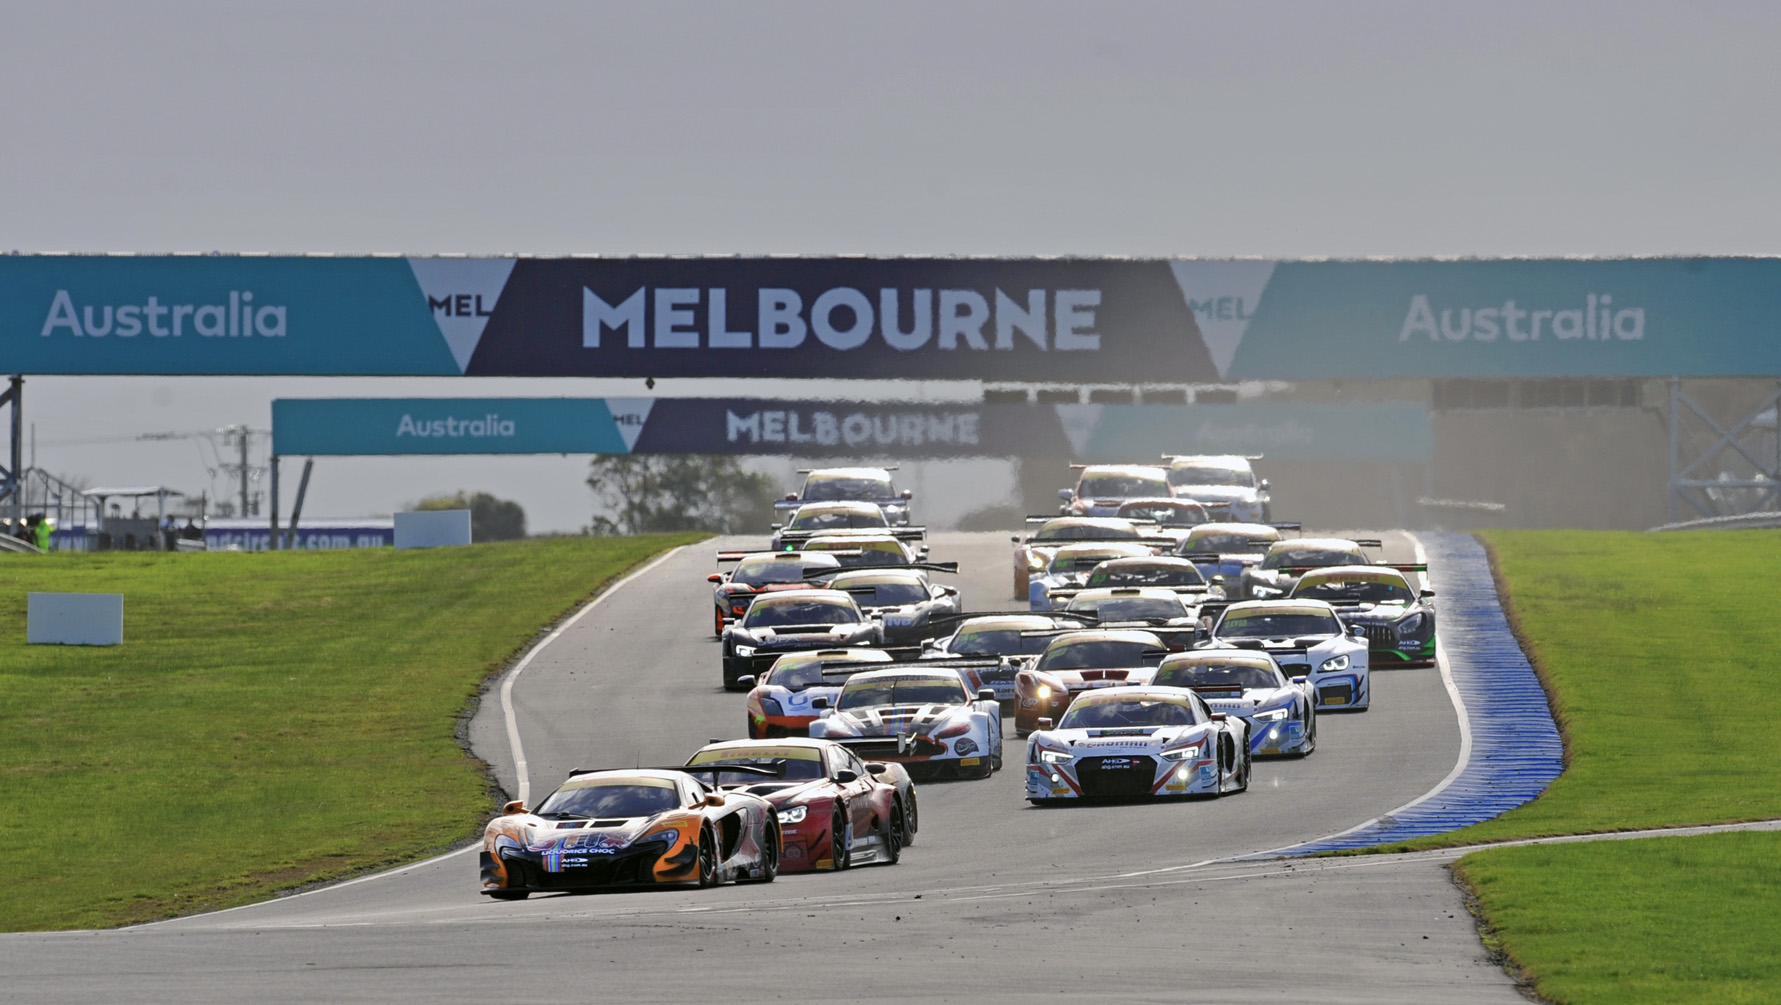 Live coverage of Australian Endurance Championship set to bring fans closer to the action